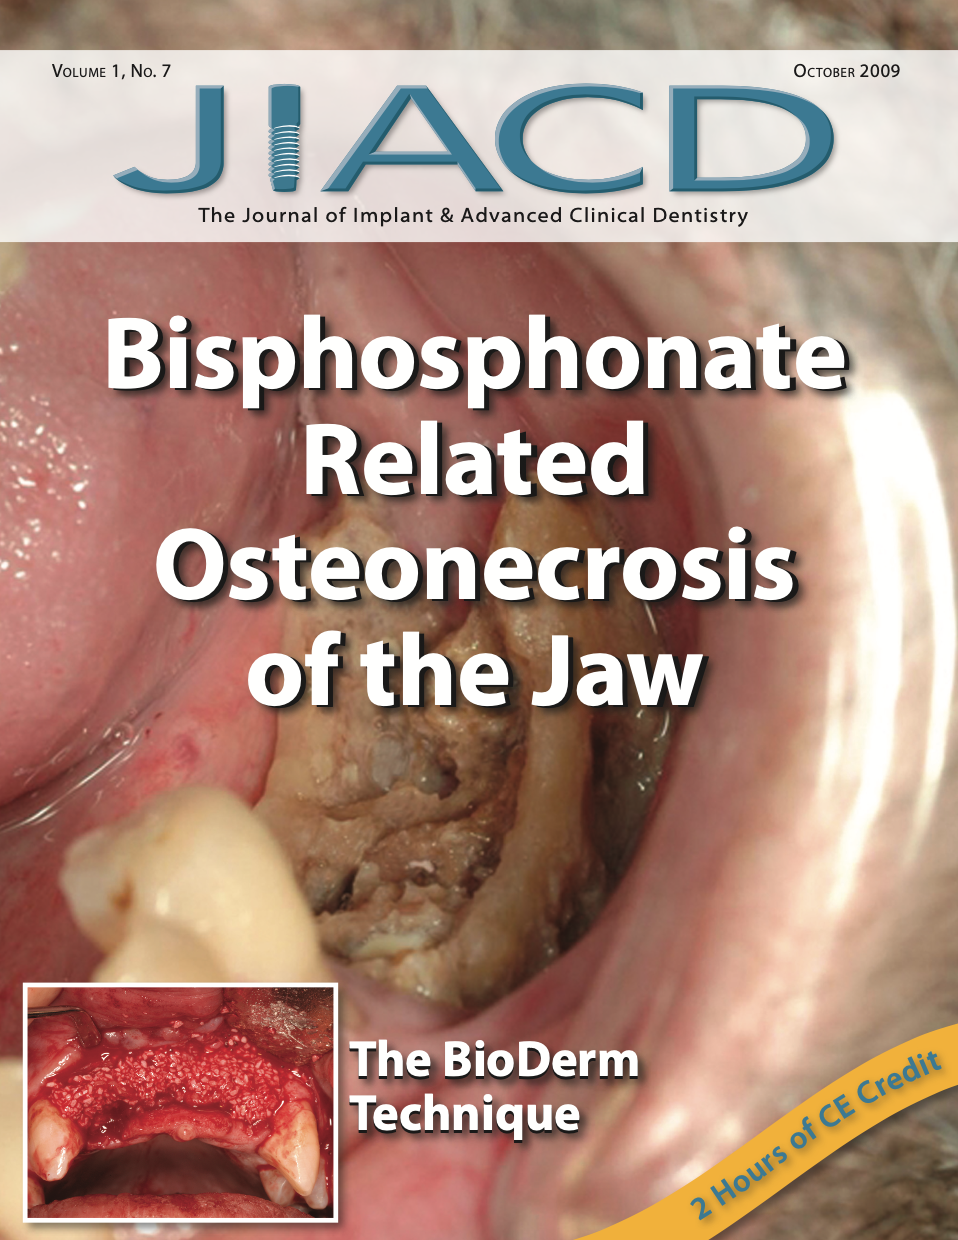 Bisphosphonate Related Osteonecrosis of the Jaw